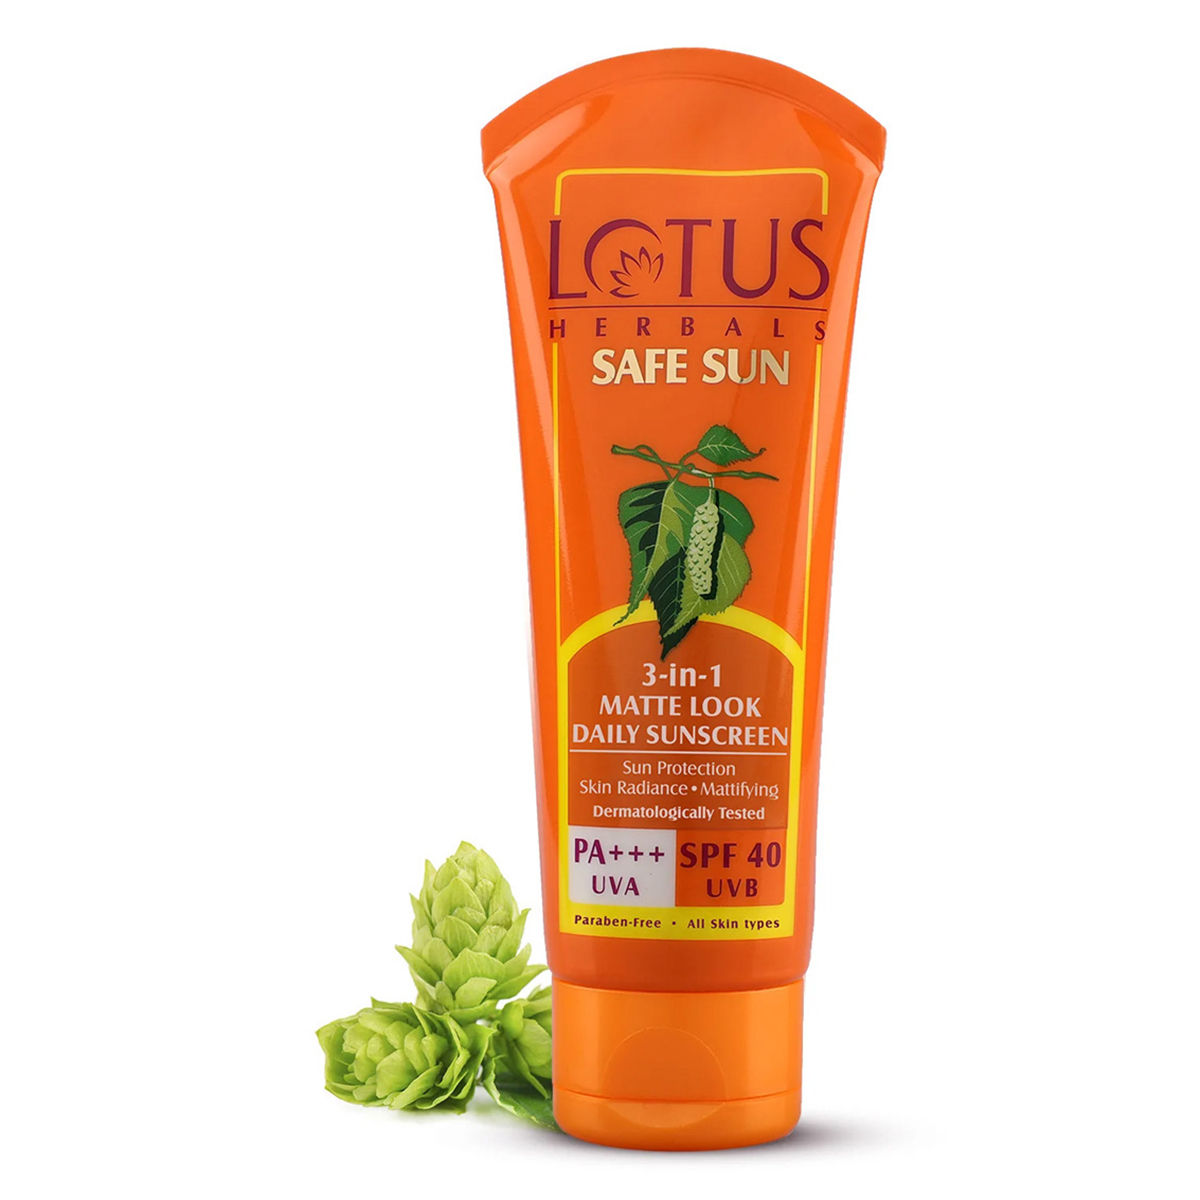 Buy Lotus Herbals Safe Sun 3-In-1 Matte Look SPF 40 PA+++ Daily Sunscreen Cream, 50 gm Online